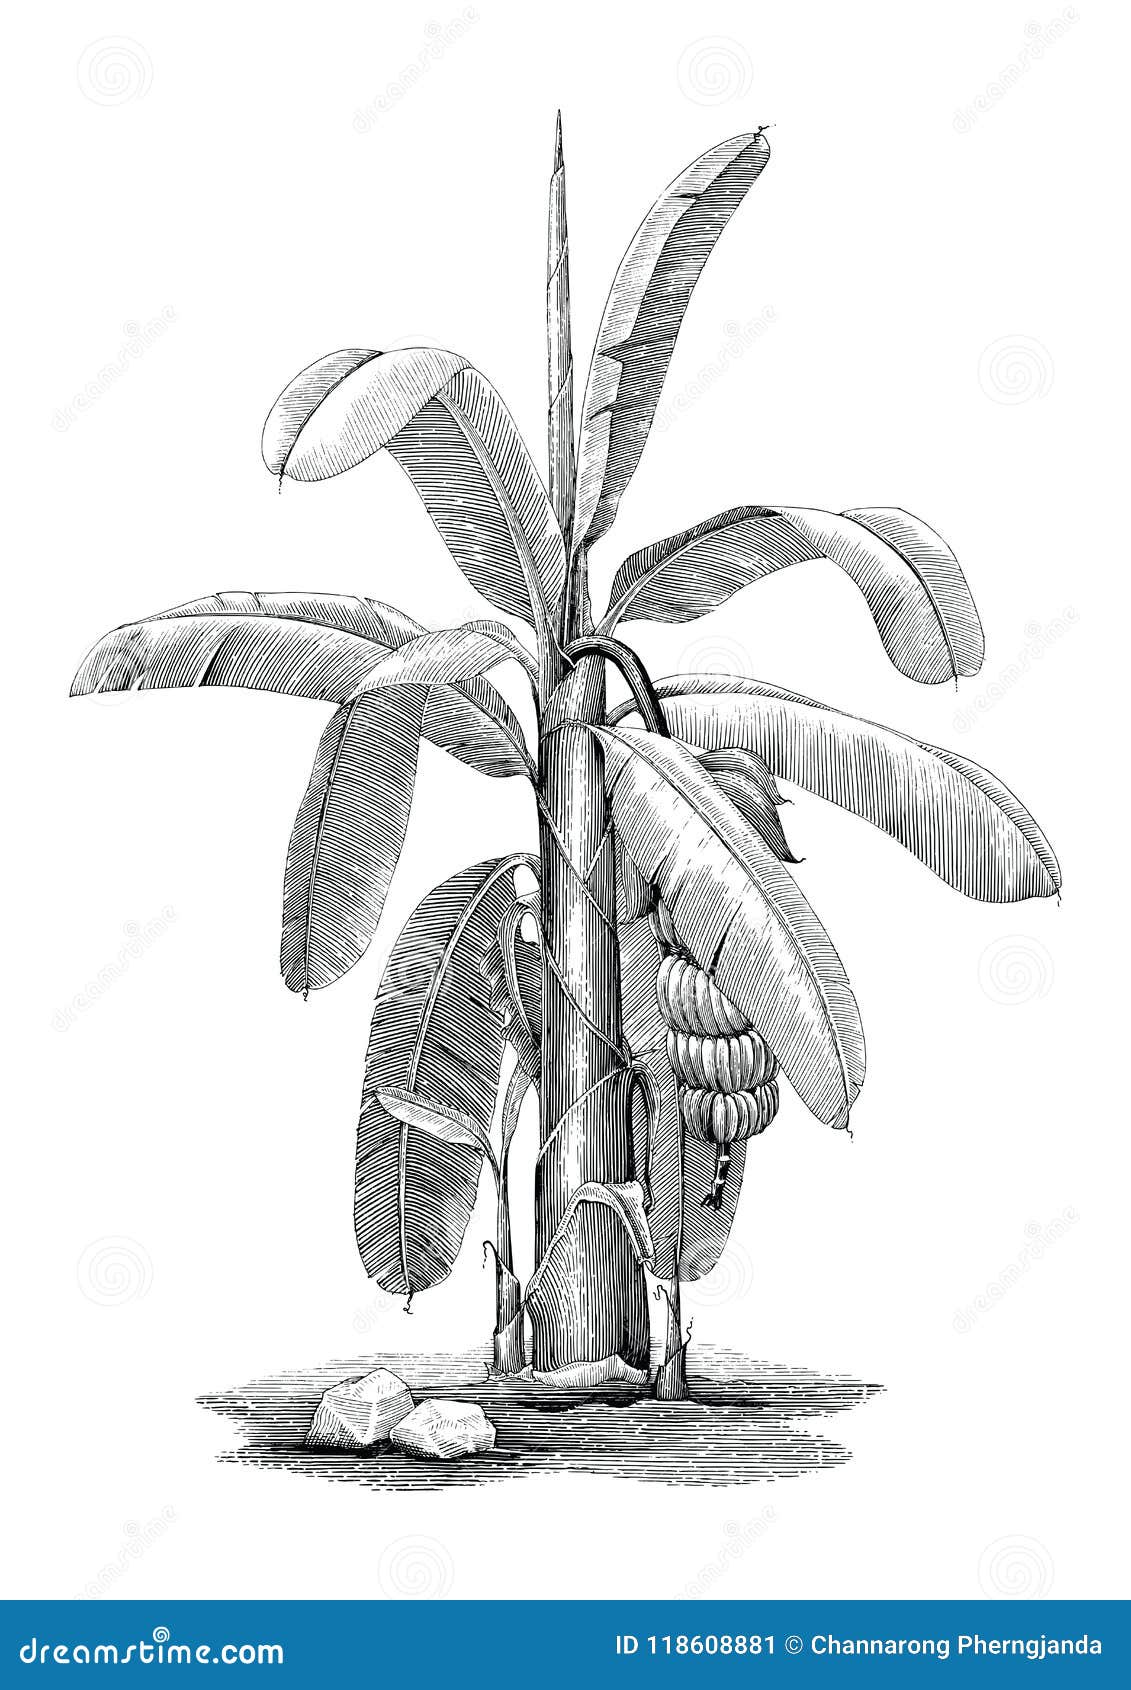 Antique Illustration Of Banana Tree High-Res Vector Graphic - Getty Images-saigonsouth.com.vn